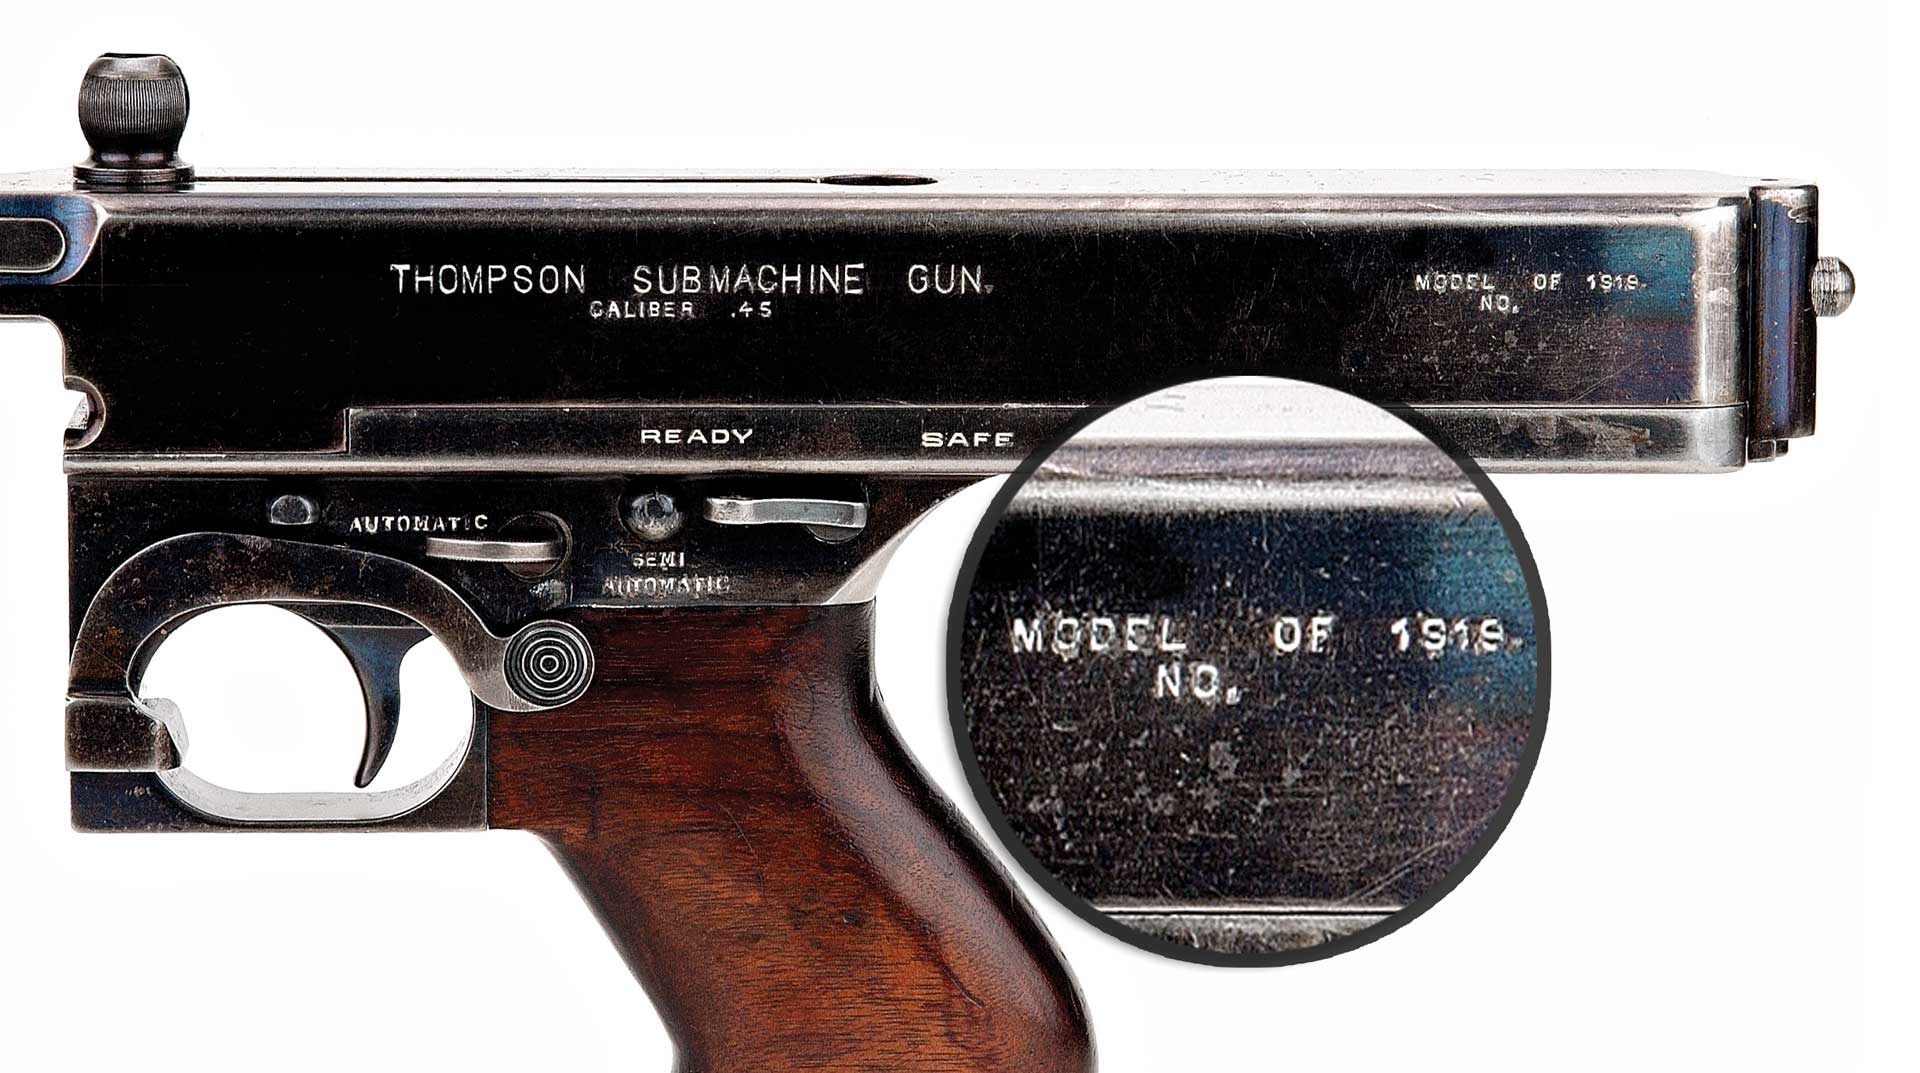 This Model of 1919 Thompson, an Annihilator III, Model G, never had a factory-stamped serial number applied. It is merely stamped “NO.”